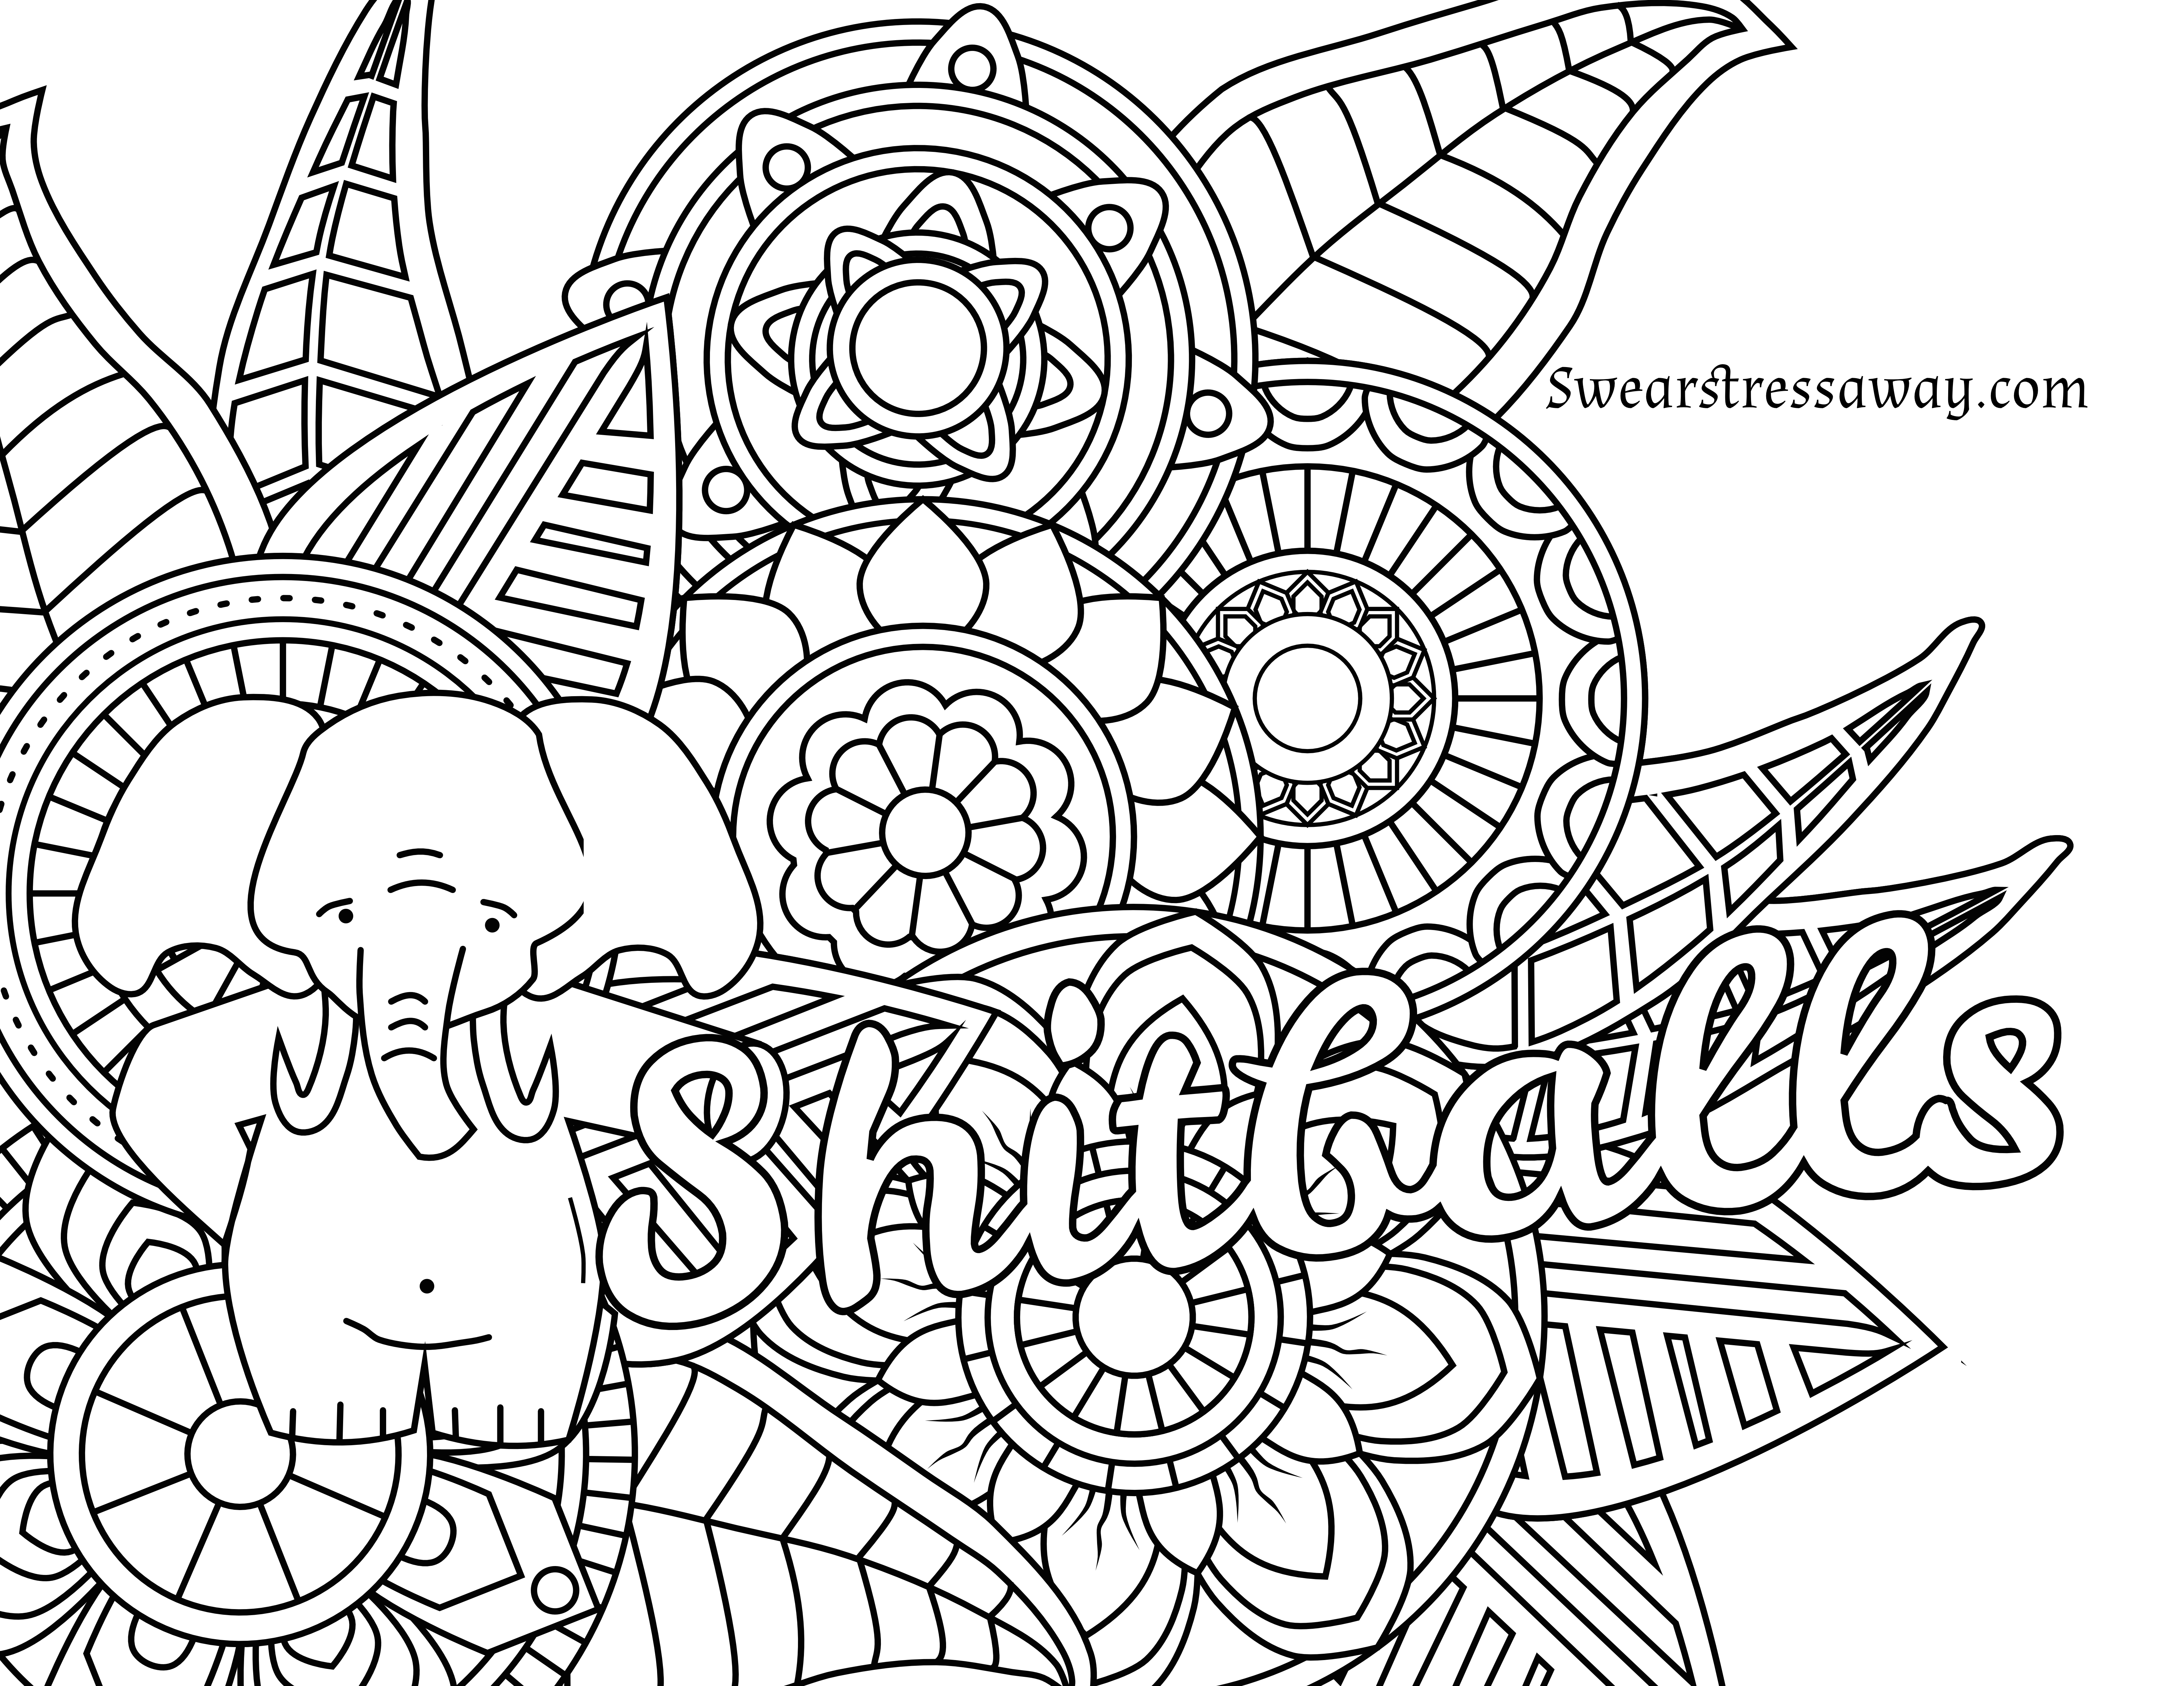 Fall Coloring Pages Free Coloring Pages And Books 53 Fabulous Fall Coloring Pages Free